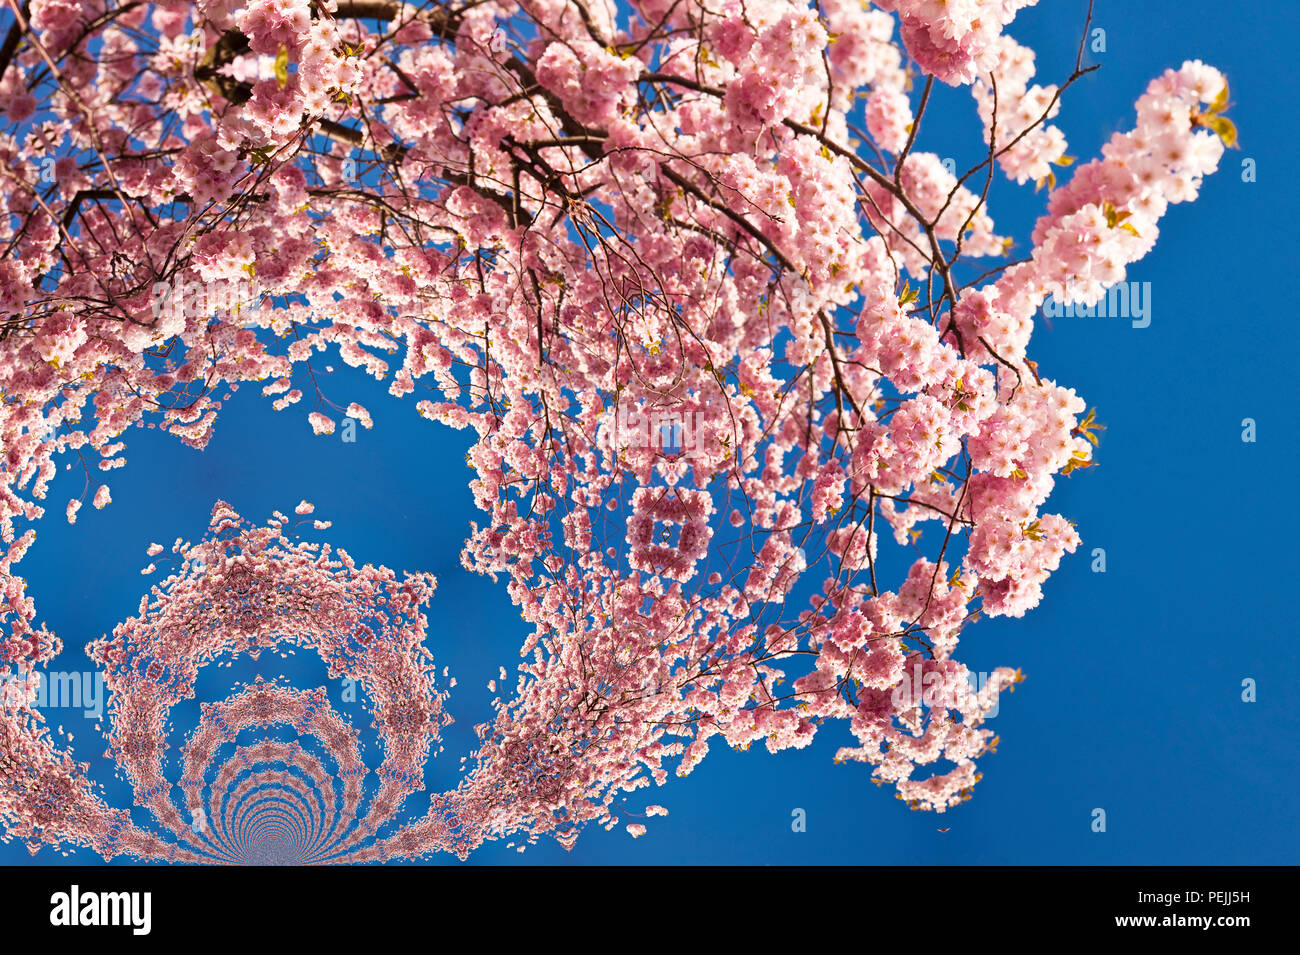 Kaleidoscopic Pattern of a Magnolia Tree, based on own Reference Image Stock Photo